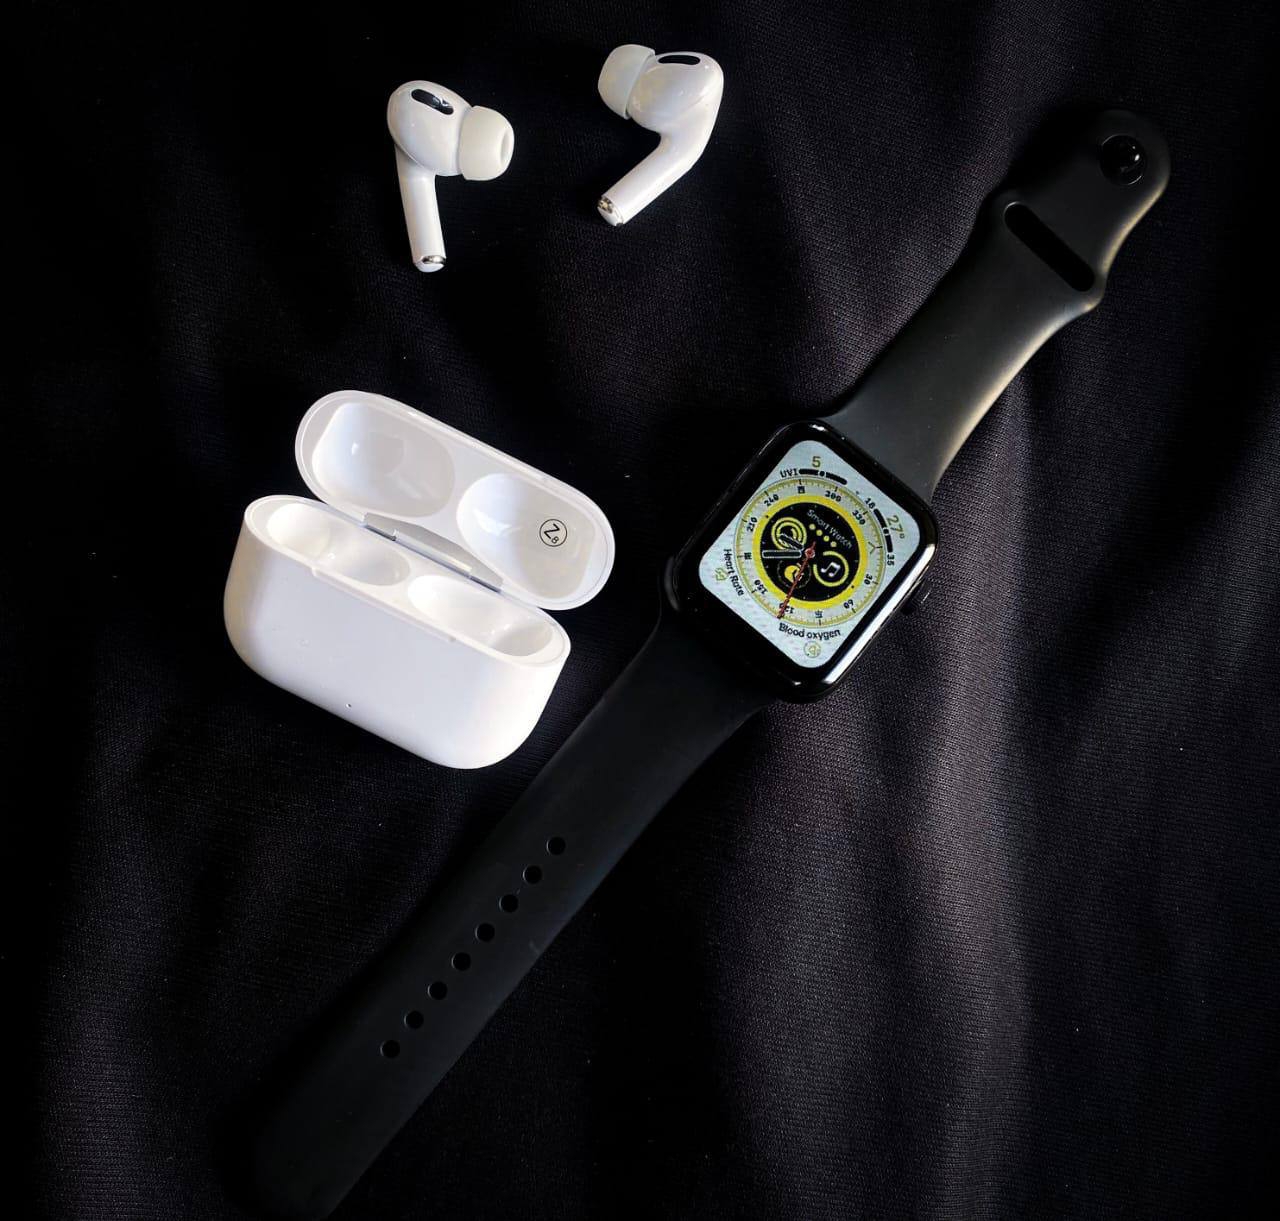 I8 Pro Max ( Series 8) With Airpods 2 Pro Tws*  - Black